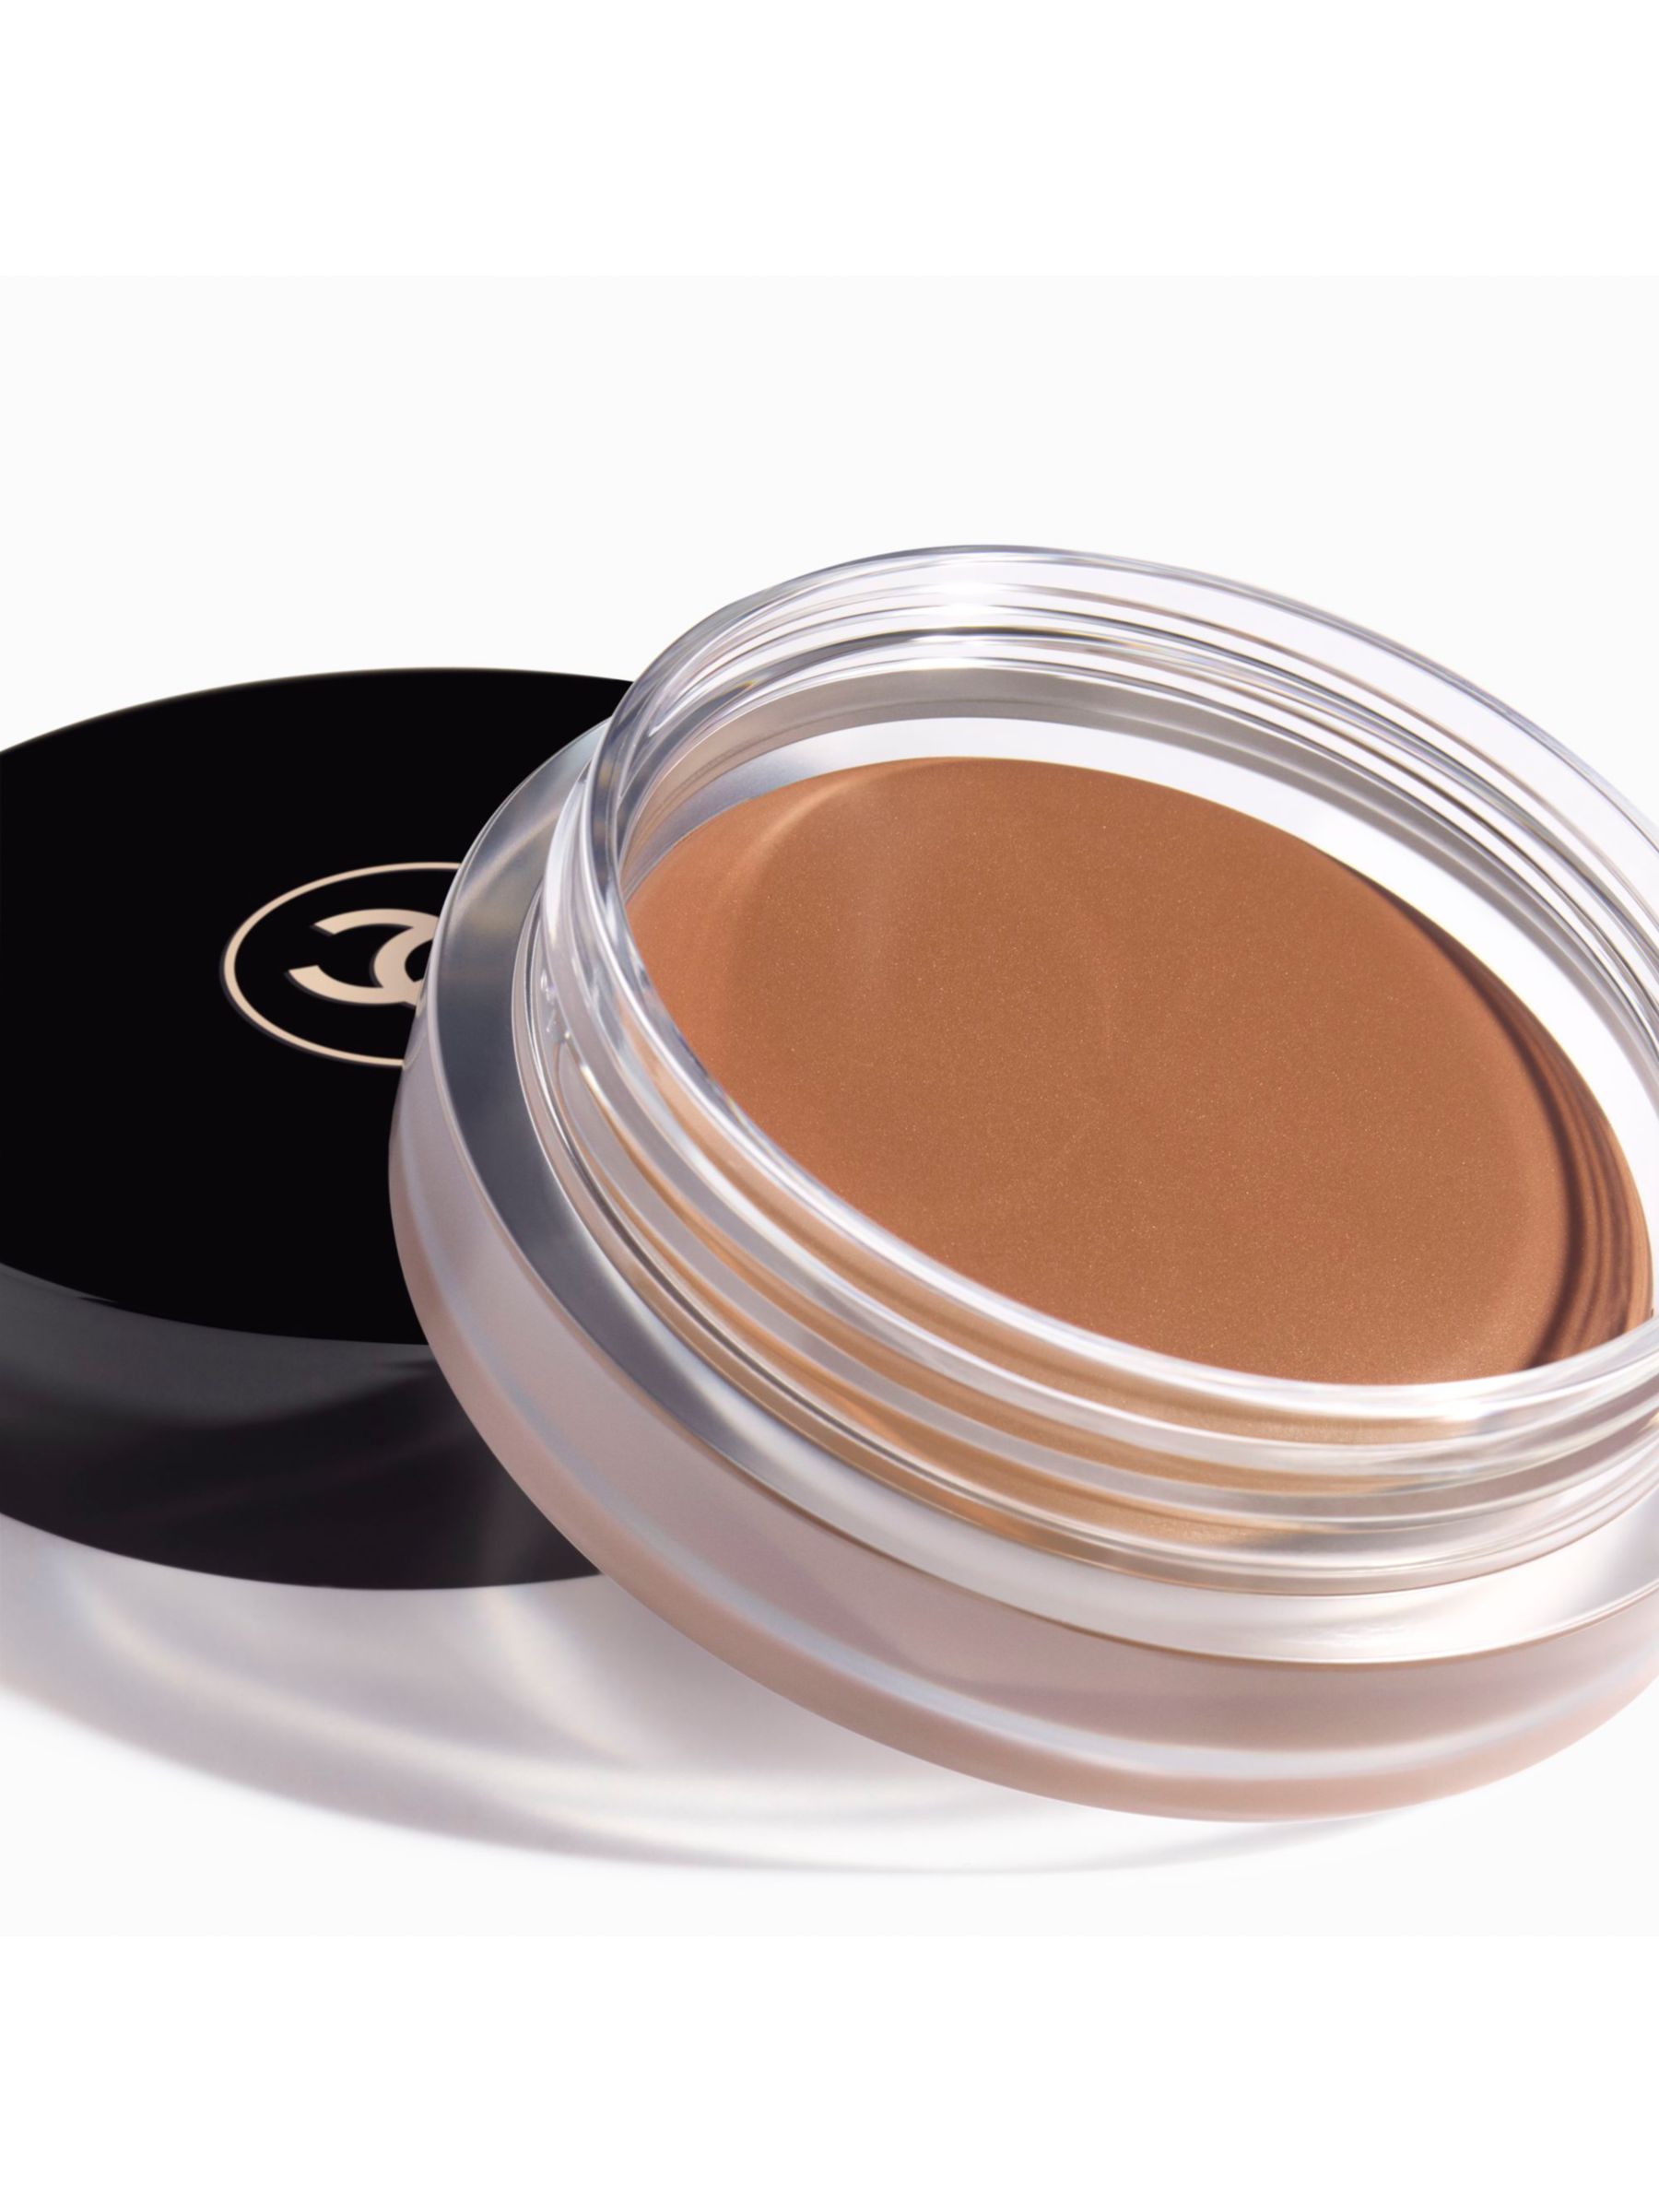 Chanel Les Beiges Healthy Glow Bronzing Cream Review 